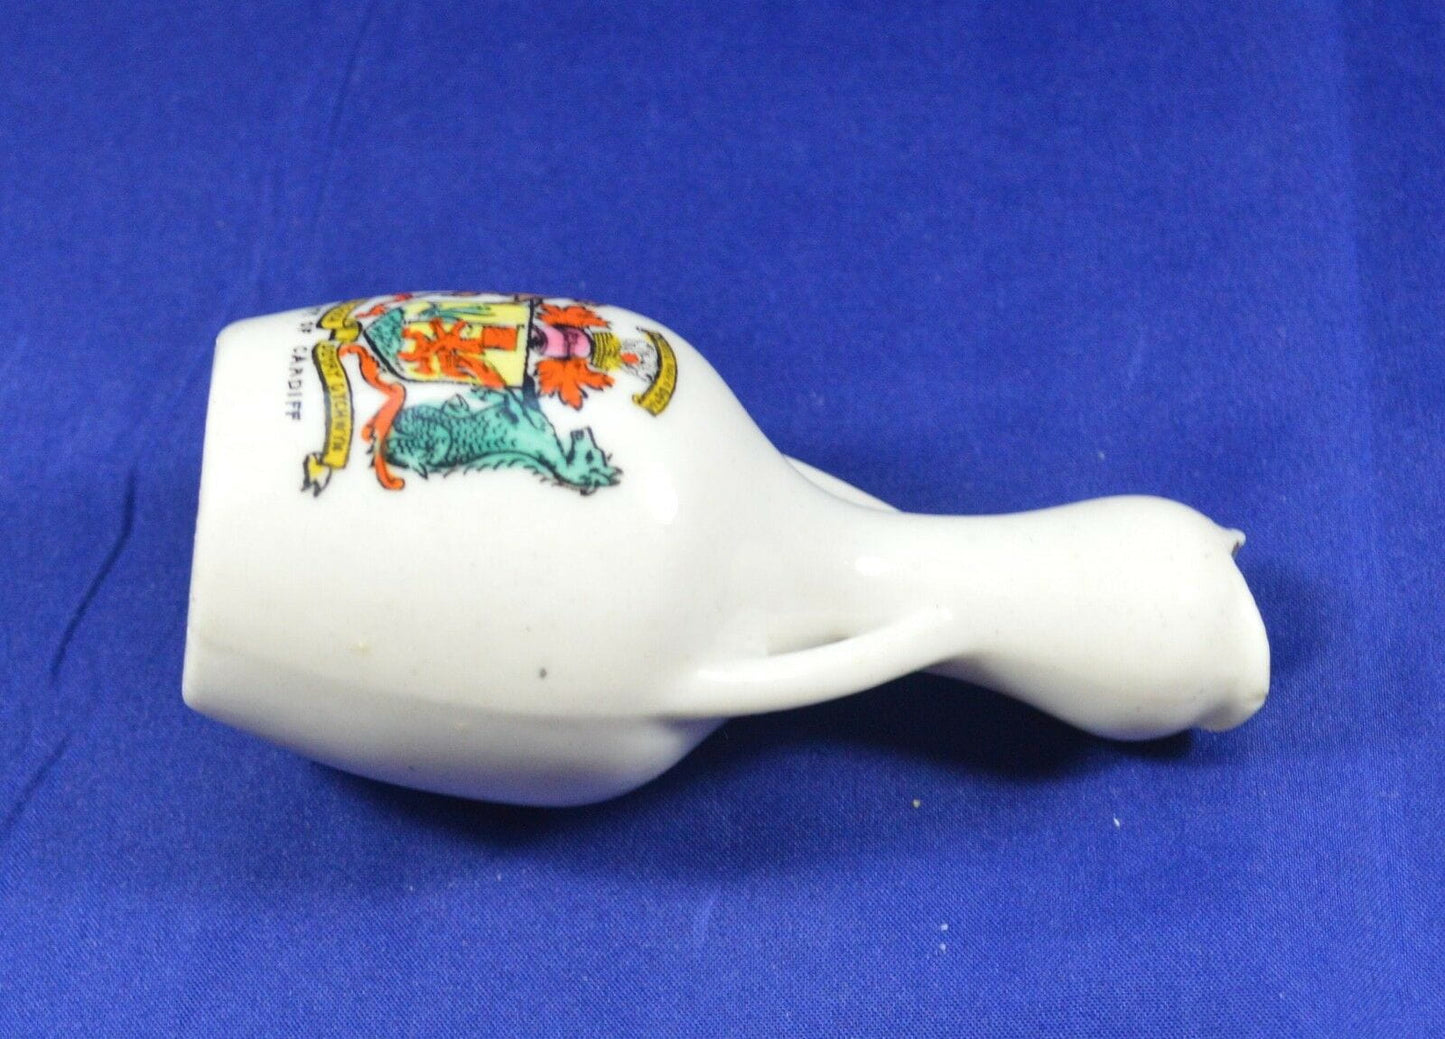 CLIFTON CHINA CRESTED WARE TWO HANDLED VASE TULIP STYLE OPENING CITY OF CARDIFF(PREVIOUSLY OWNED)  - TMD167207